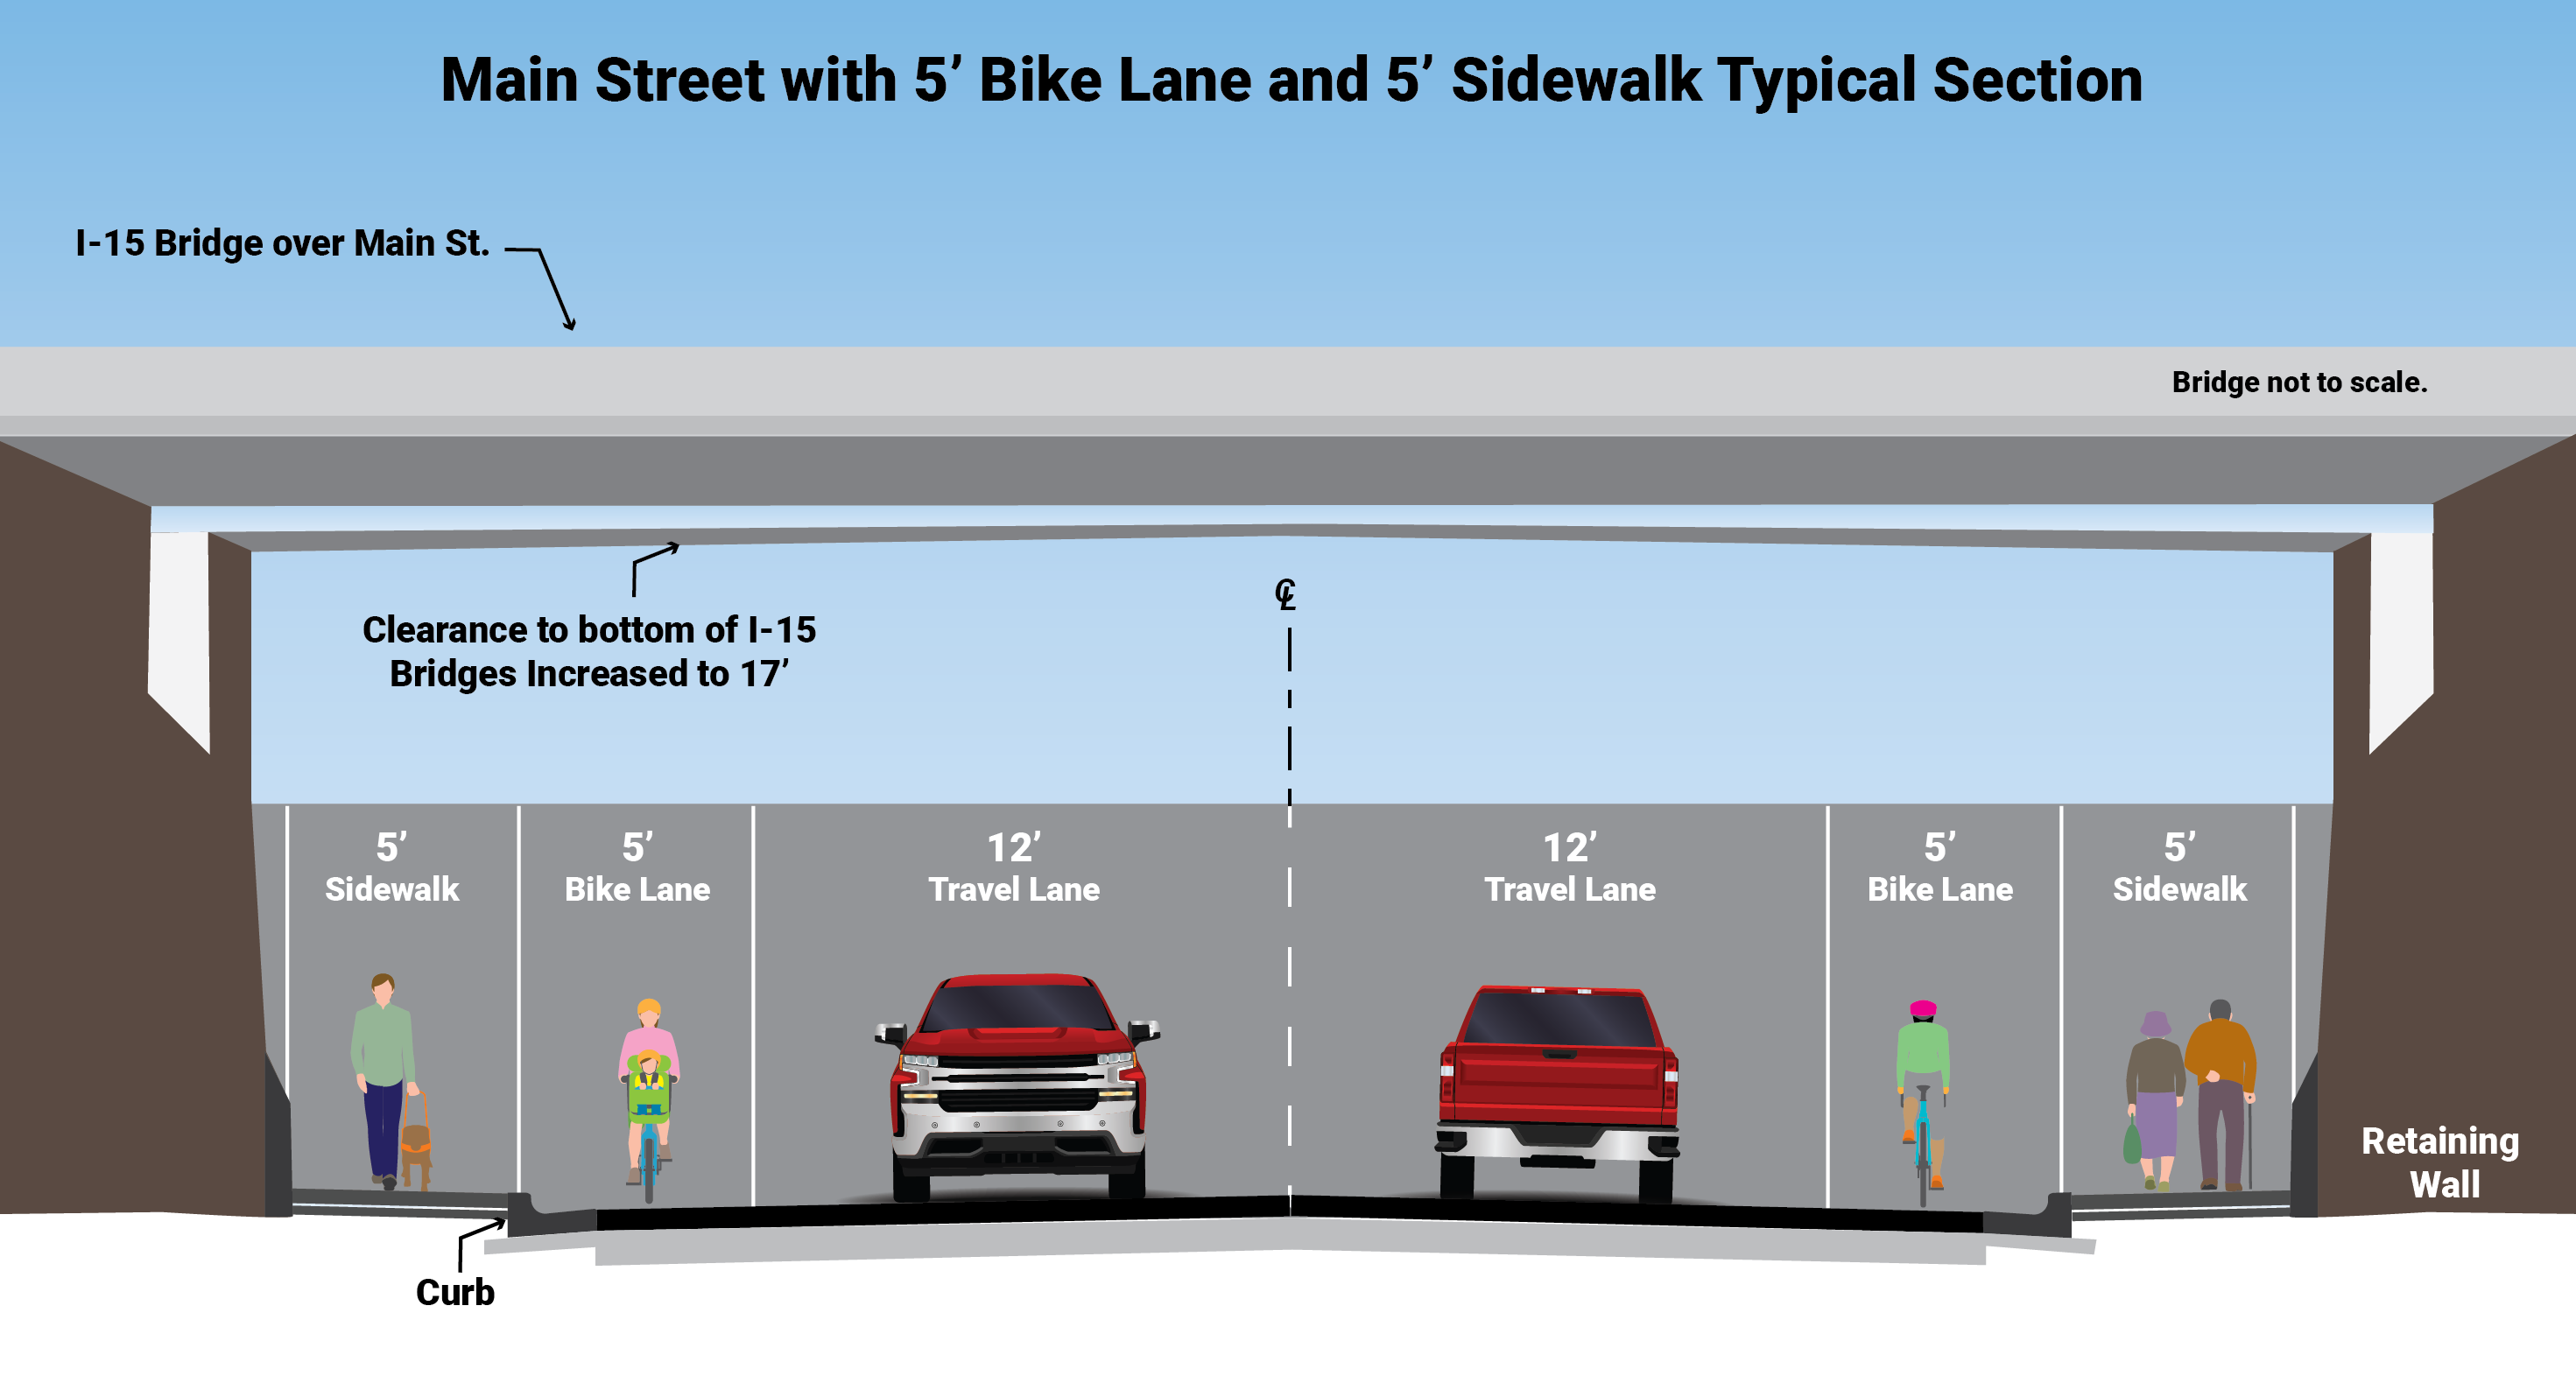 Cross section of Main Street crossing under Interstate 15 Bridge. Increased clearance of I-15 bridge to 17 feet. Main Street lane and sidewalk typicals: 5 foot sidewalk, curb separating sidewalk and bike lane, 5 foot bike lane and 12 foot travel lane in both directions.